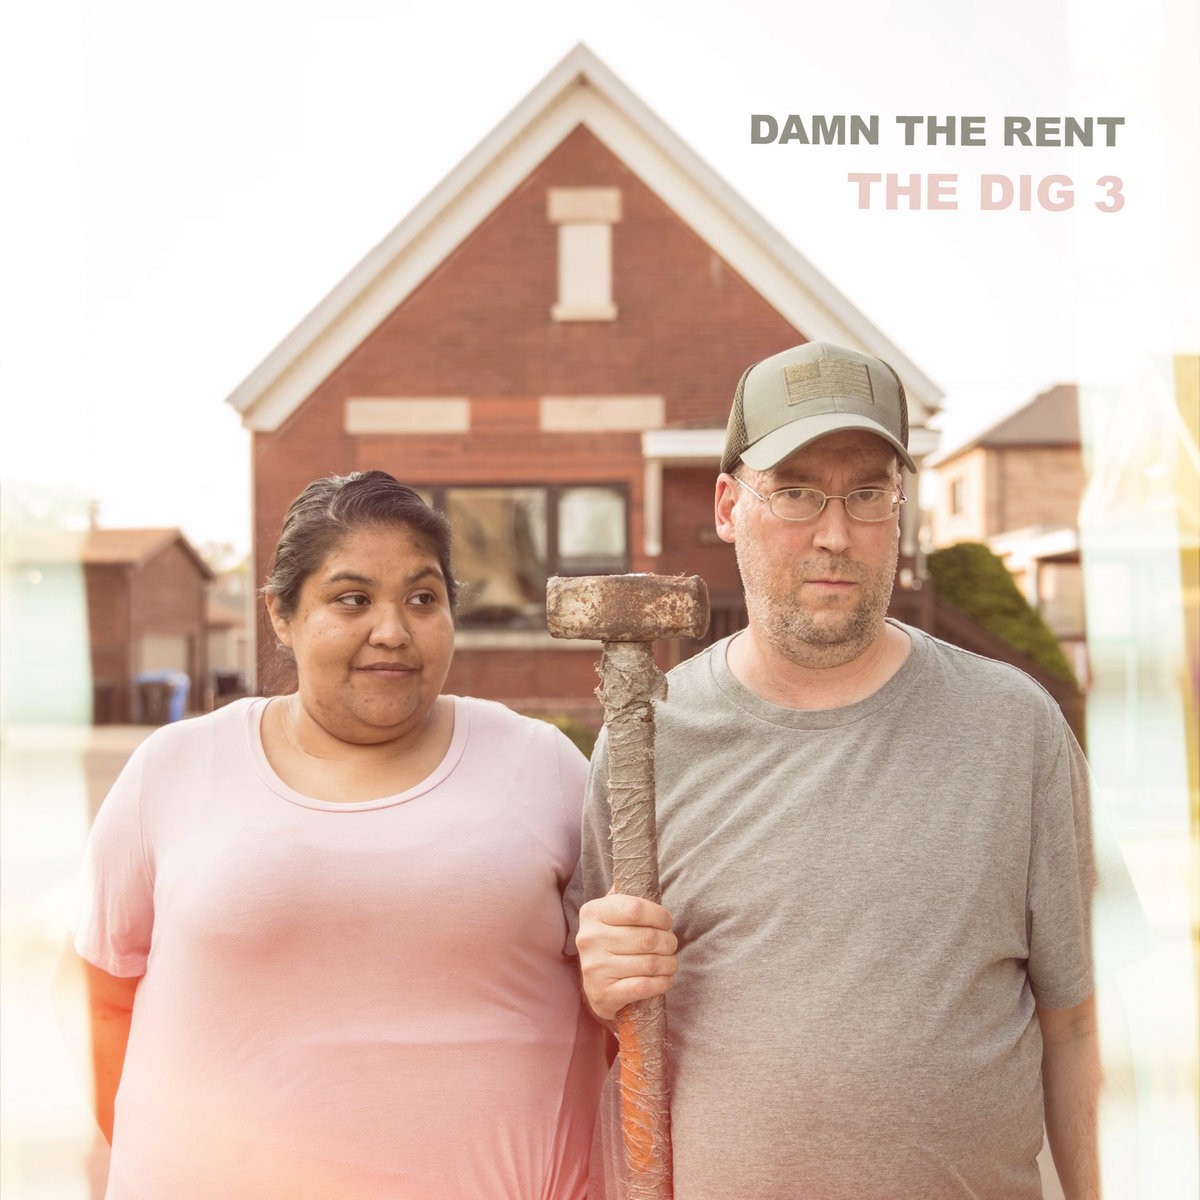 The Dig 3 - Damn The Rent